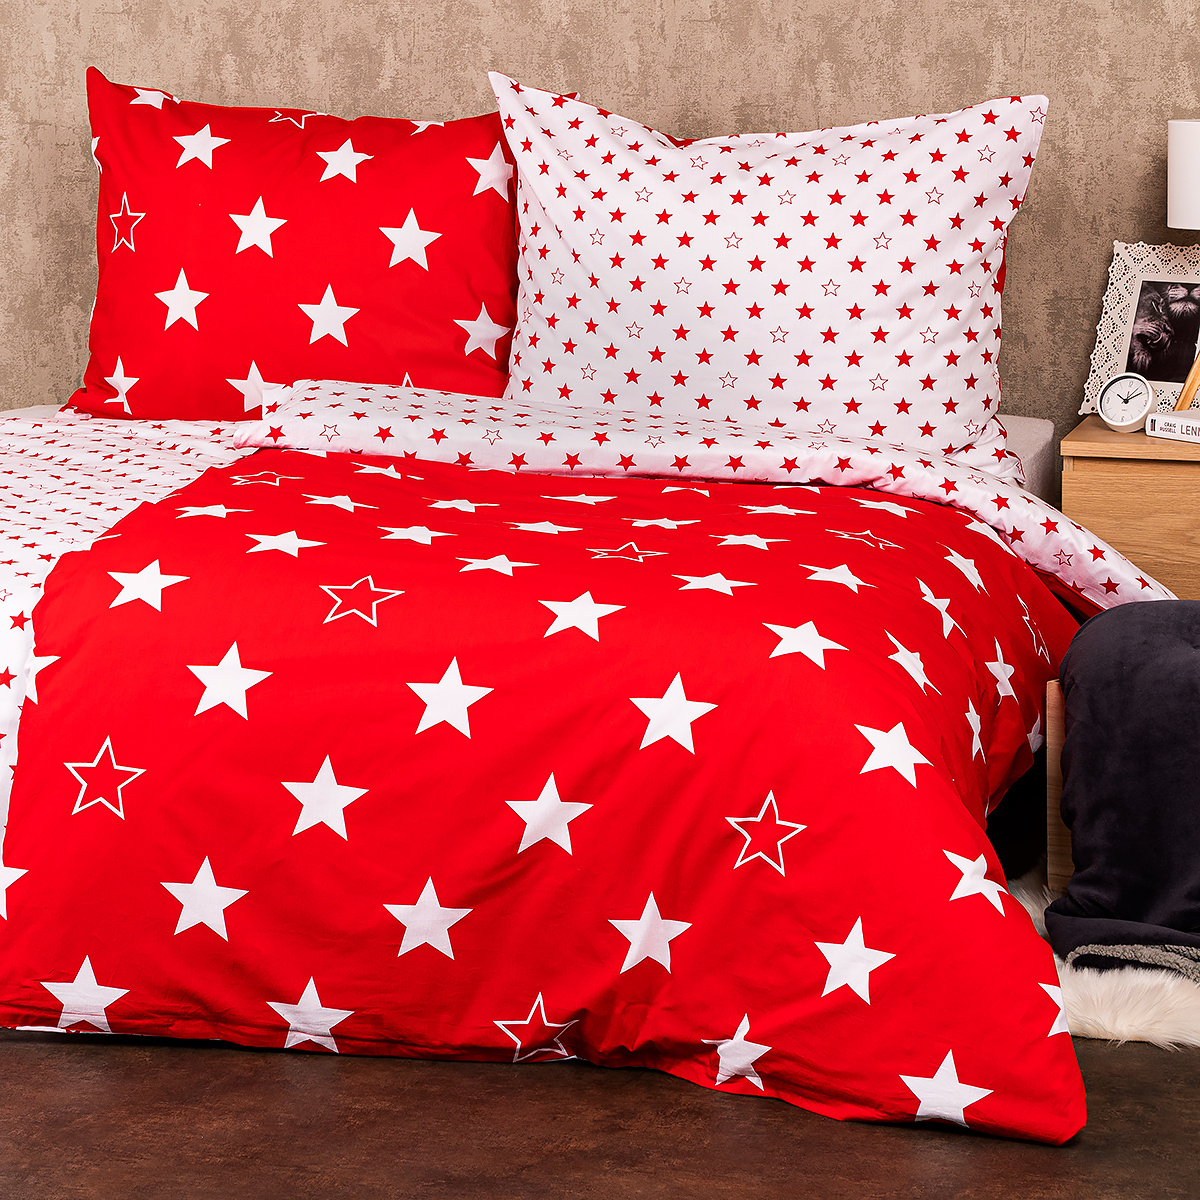 Lenjerie bumbac 4Home Stars red, 140 x 200 cm, 70 x 90 cm 4Home